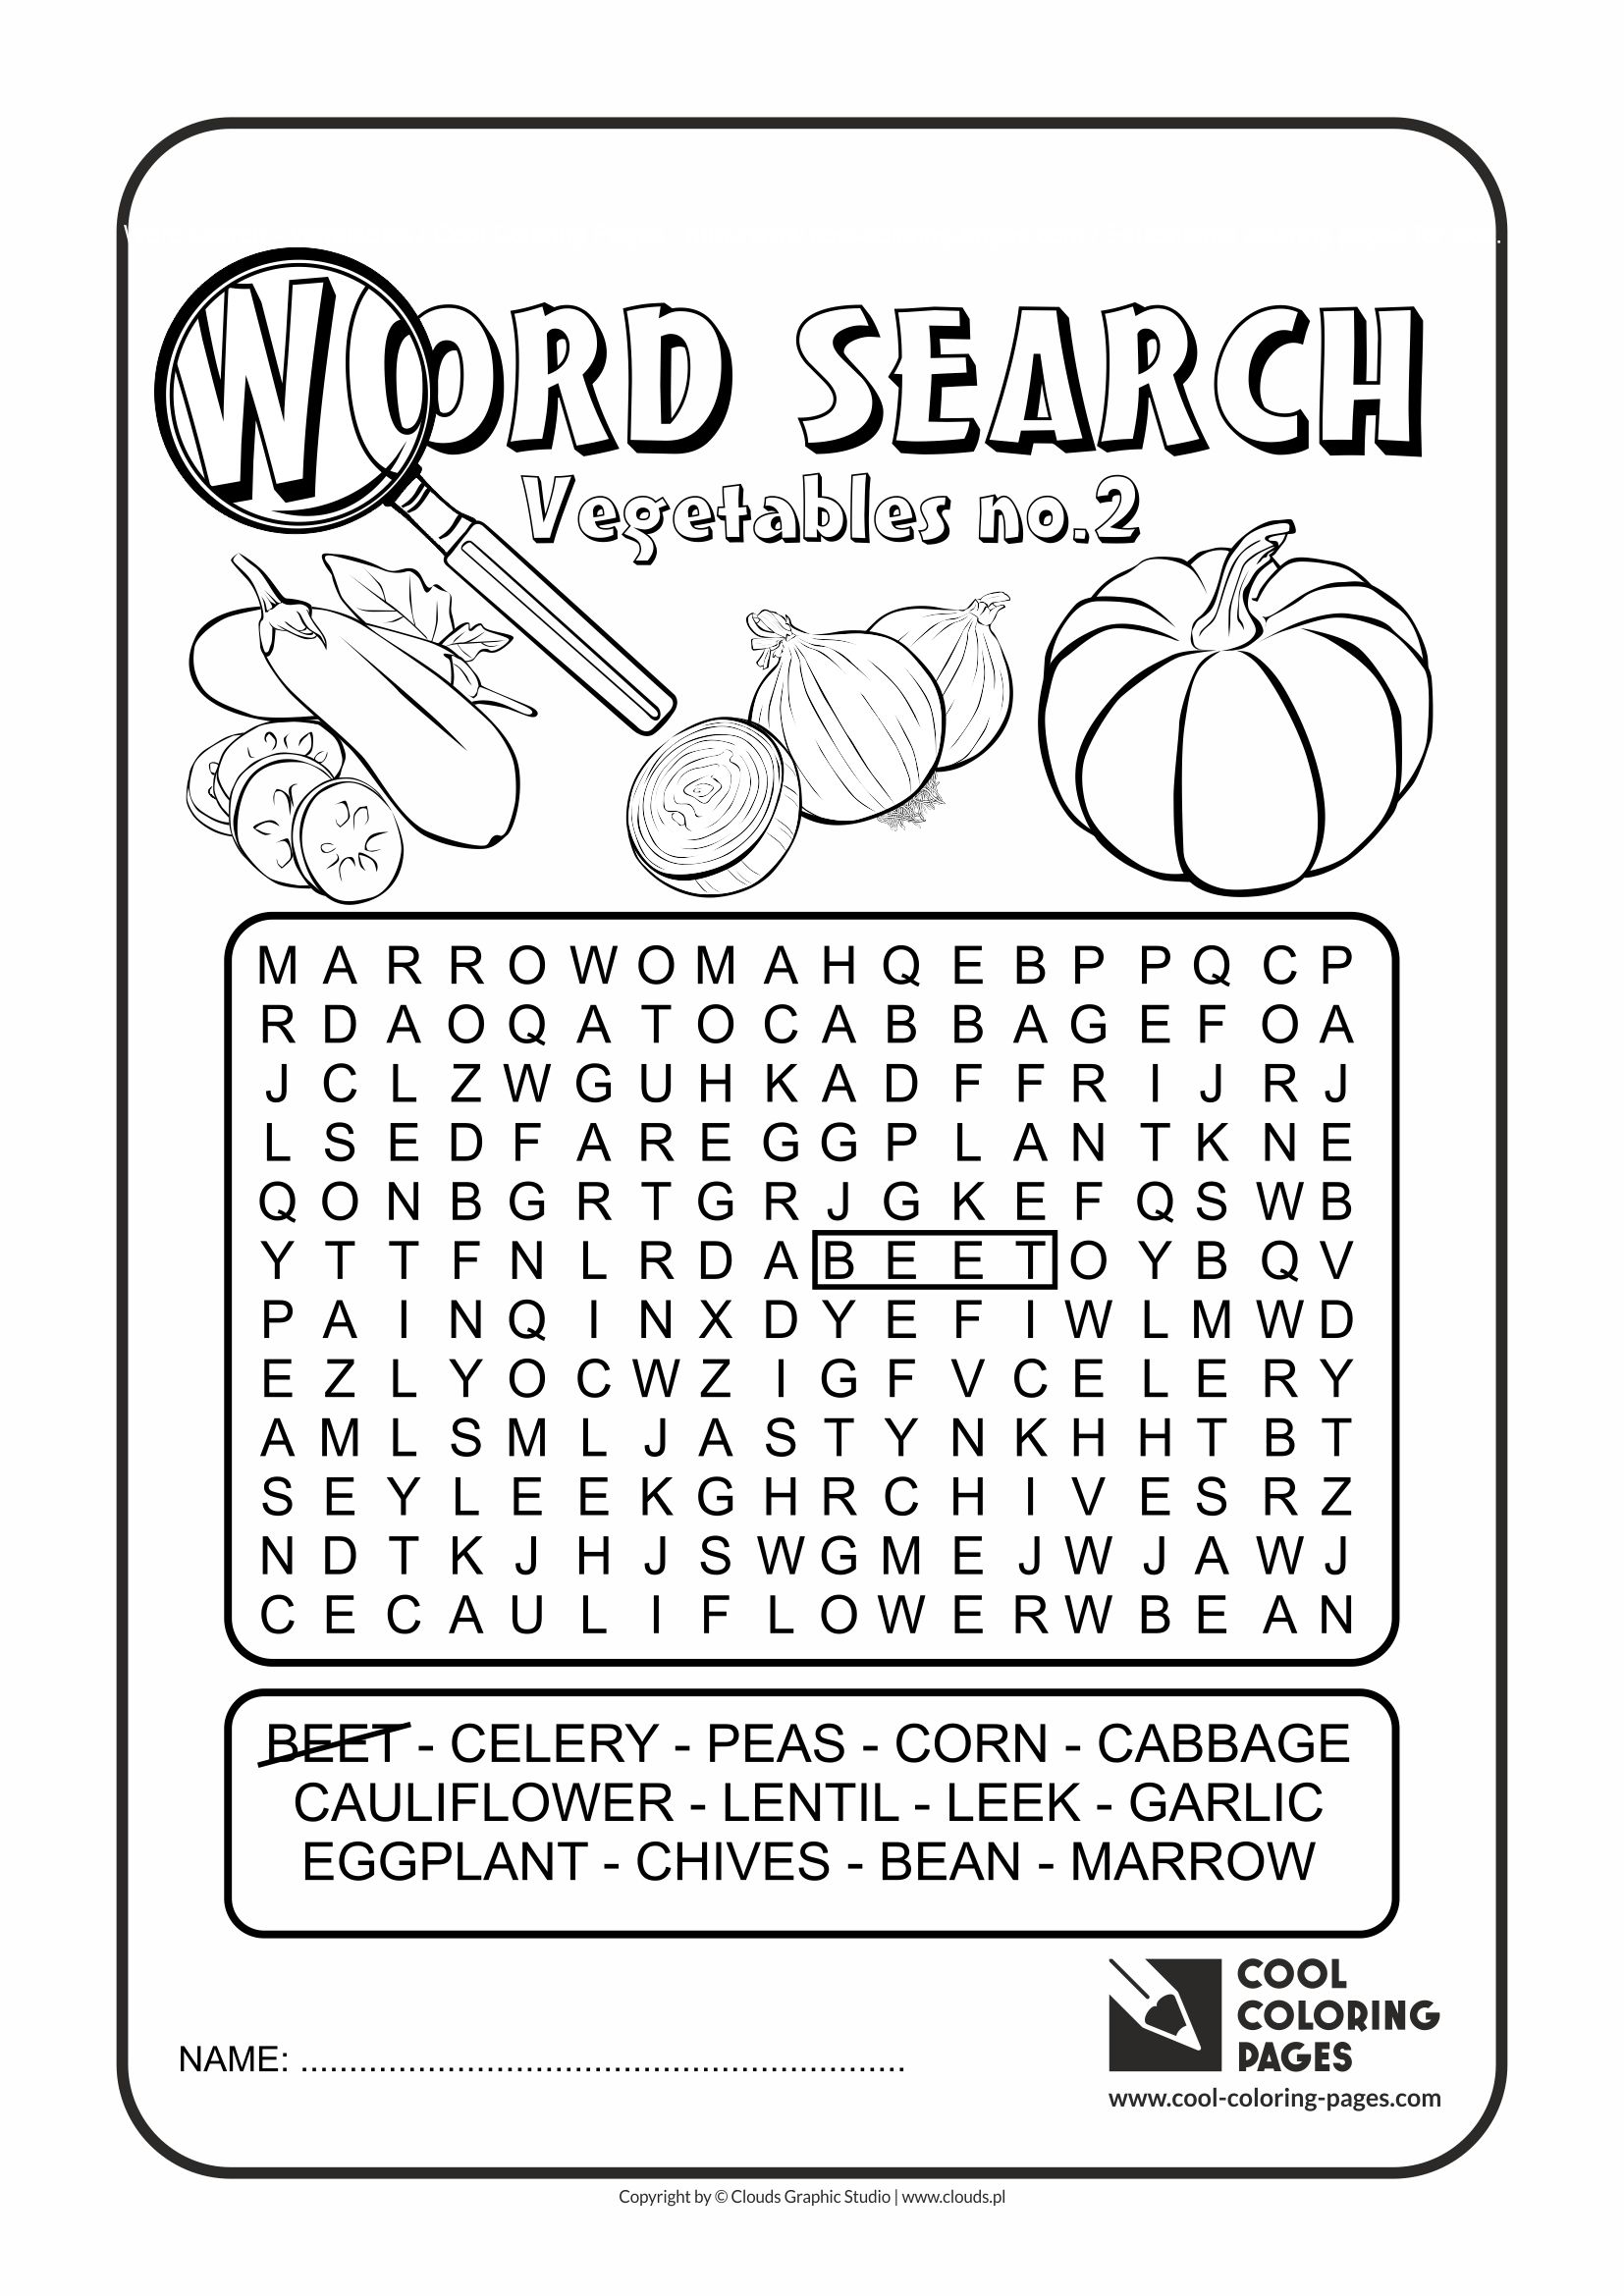 Cool Coloring Pages - Word search / Word search vegetables no 2 / Coloring page with word search vegetables no 2